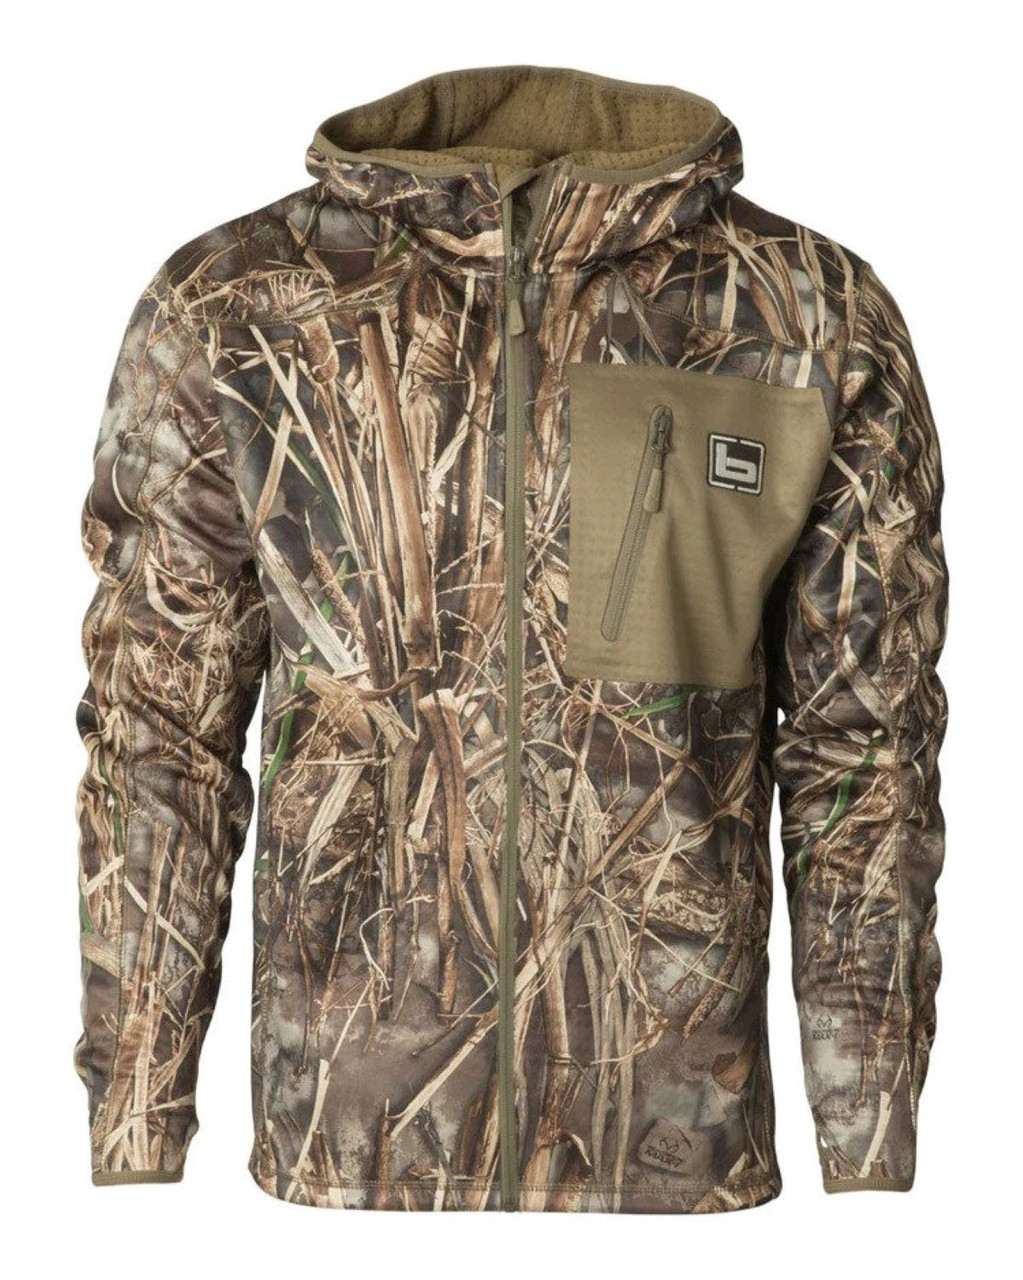 Banded Hooded Mid-Layer Fleece Jacket - Realtree - MAX7 - B1010062-M7-M